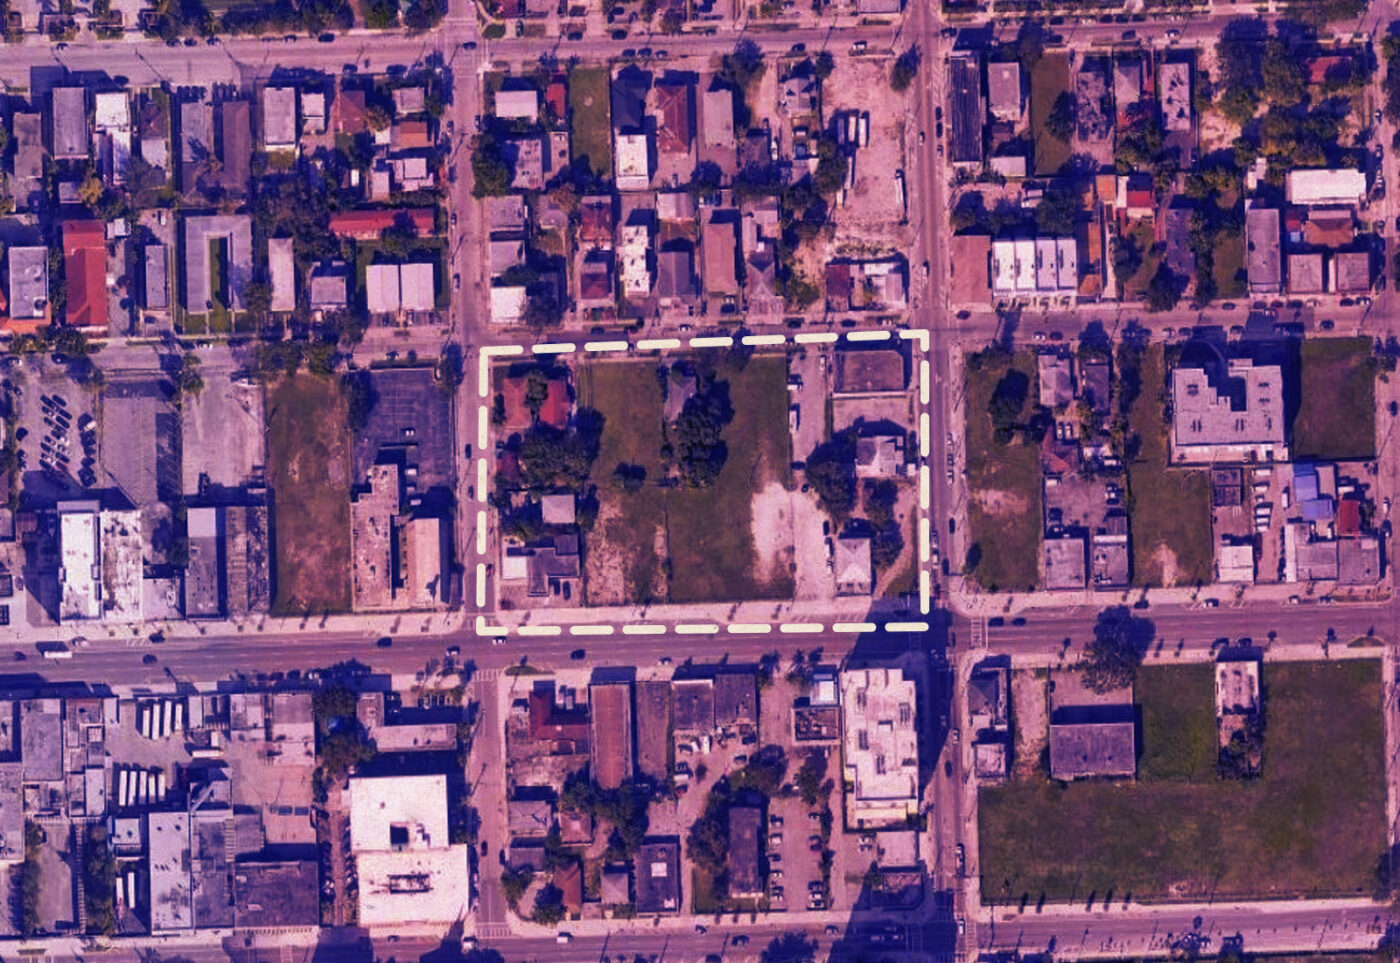 805 to 861 West Flagler Street and 826 to 860 Northwest First Street (Google Maps, Getty)